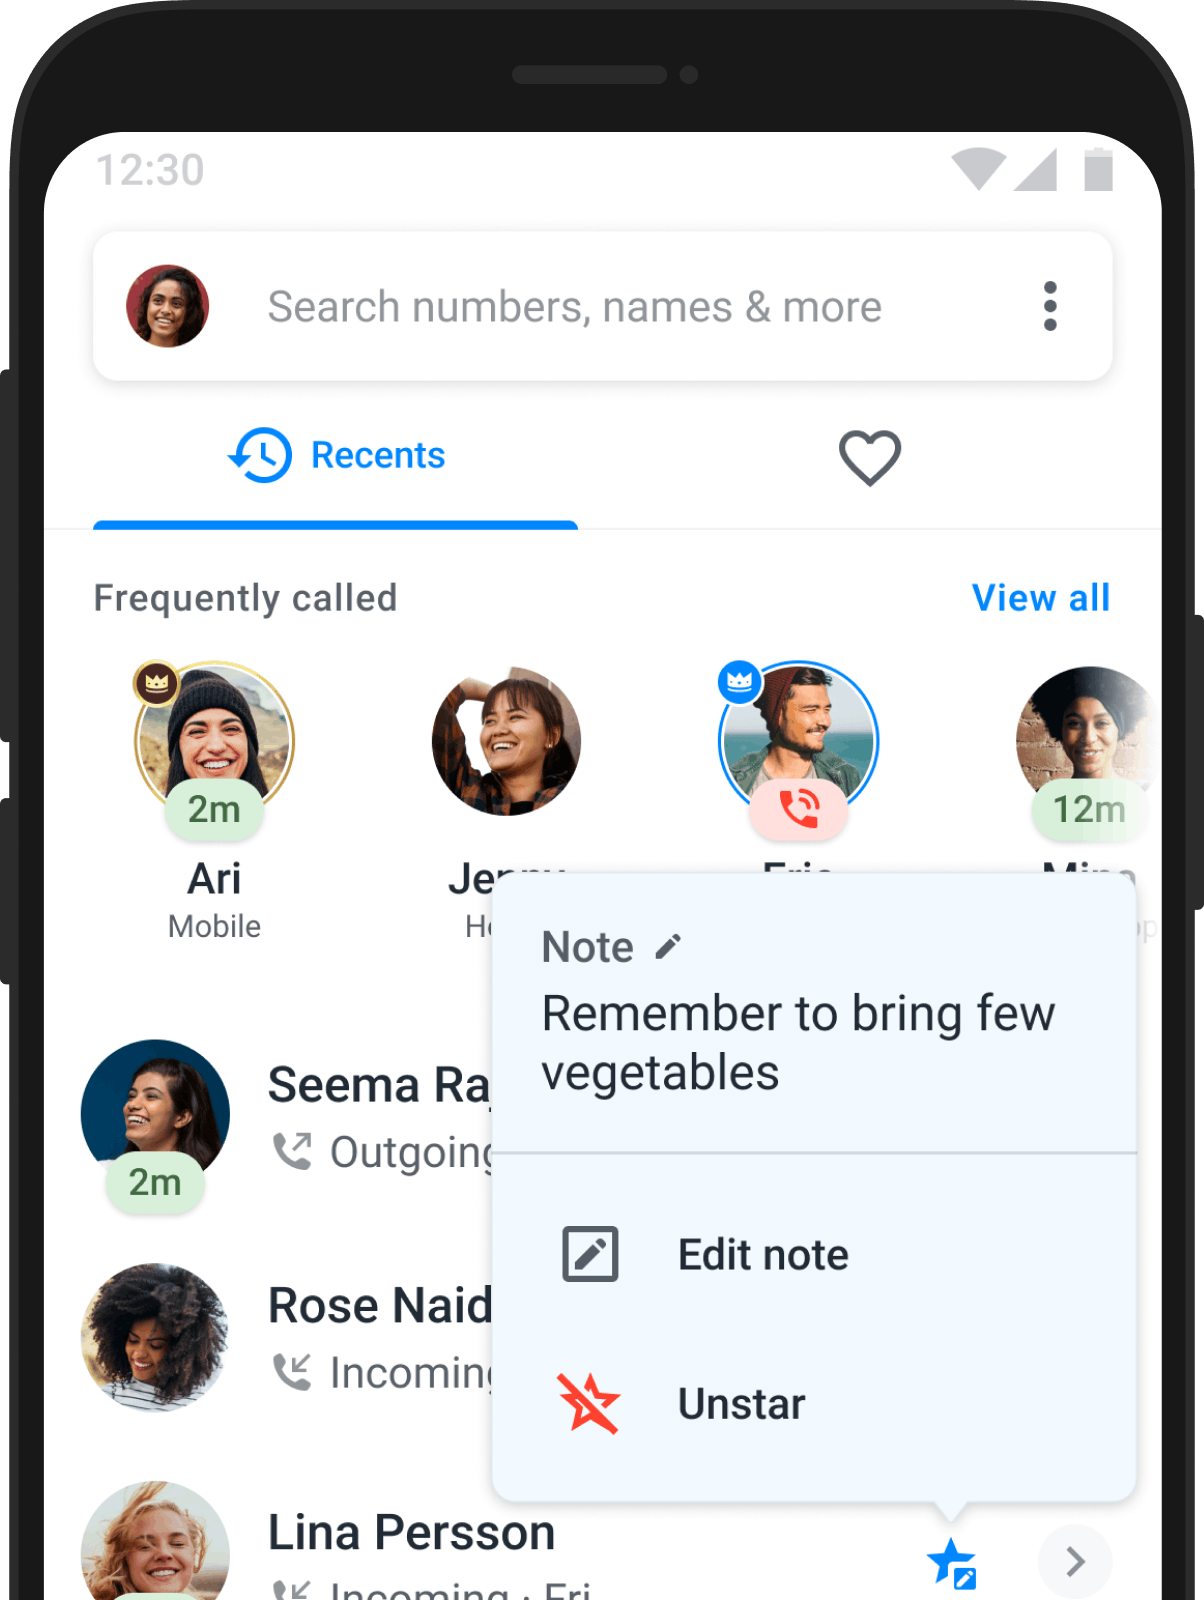 Star Call helps you summarize calls with notes